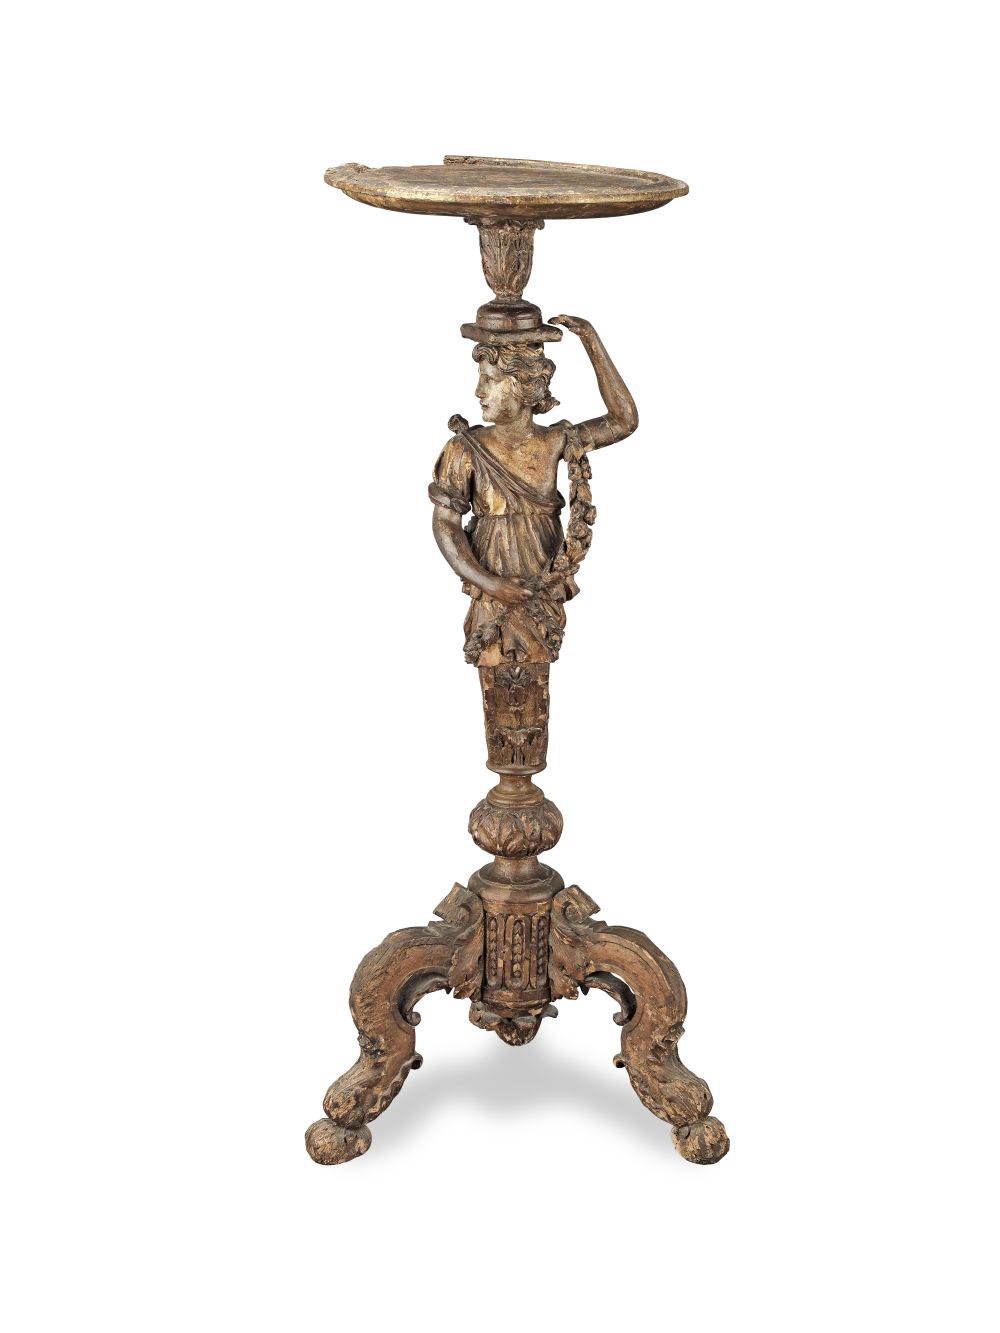 A Dutch late 17th/early 18th century carved giltwood figural tripod torchere 1700-1710